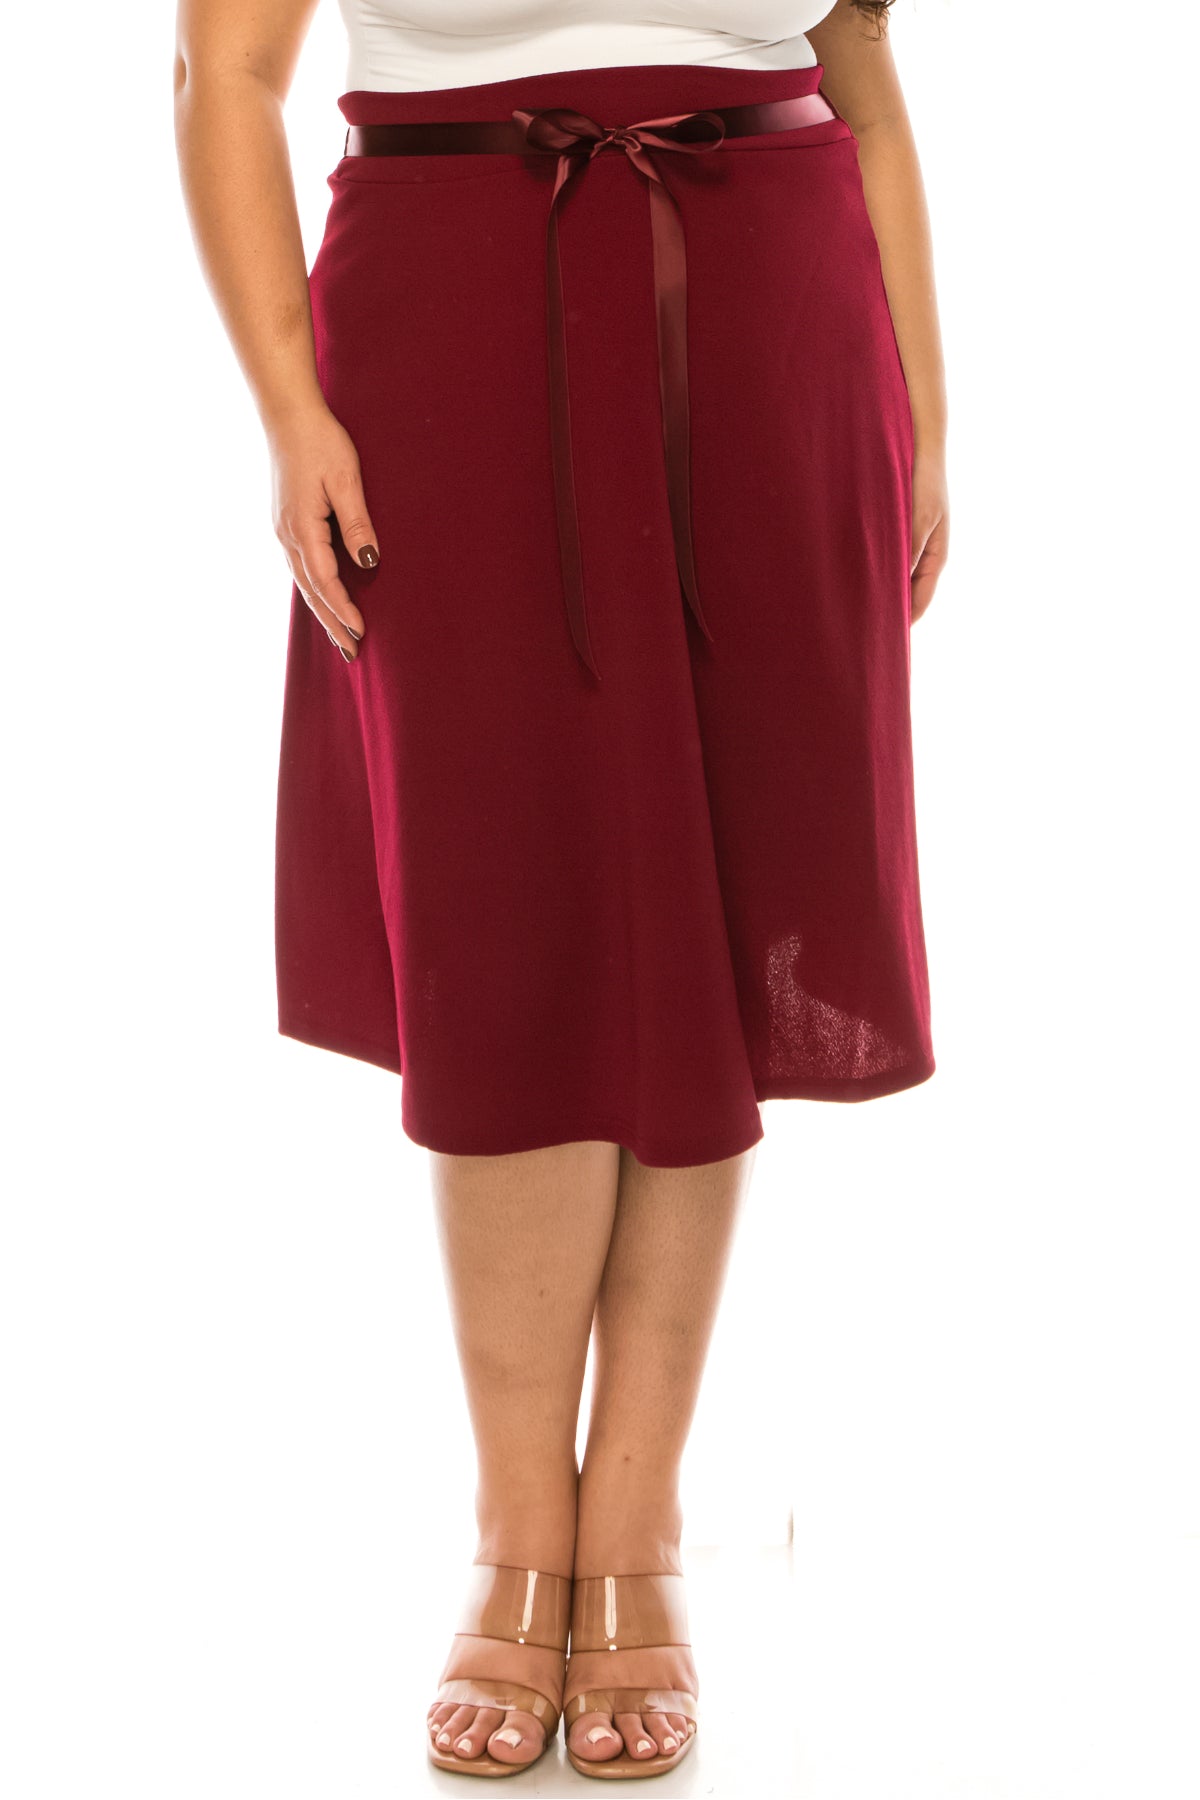 Women's Plus Size Casual High Waist Bow Tie Belted A Line Midi Knee Length Skirts